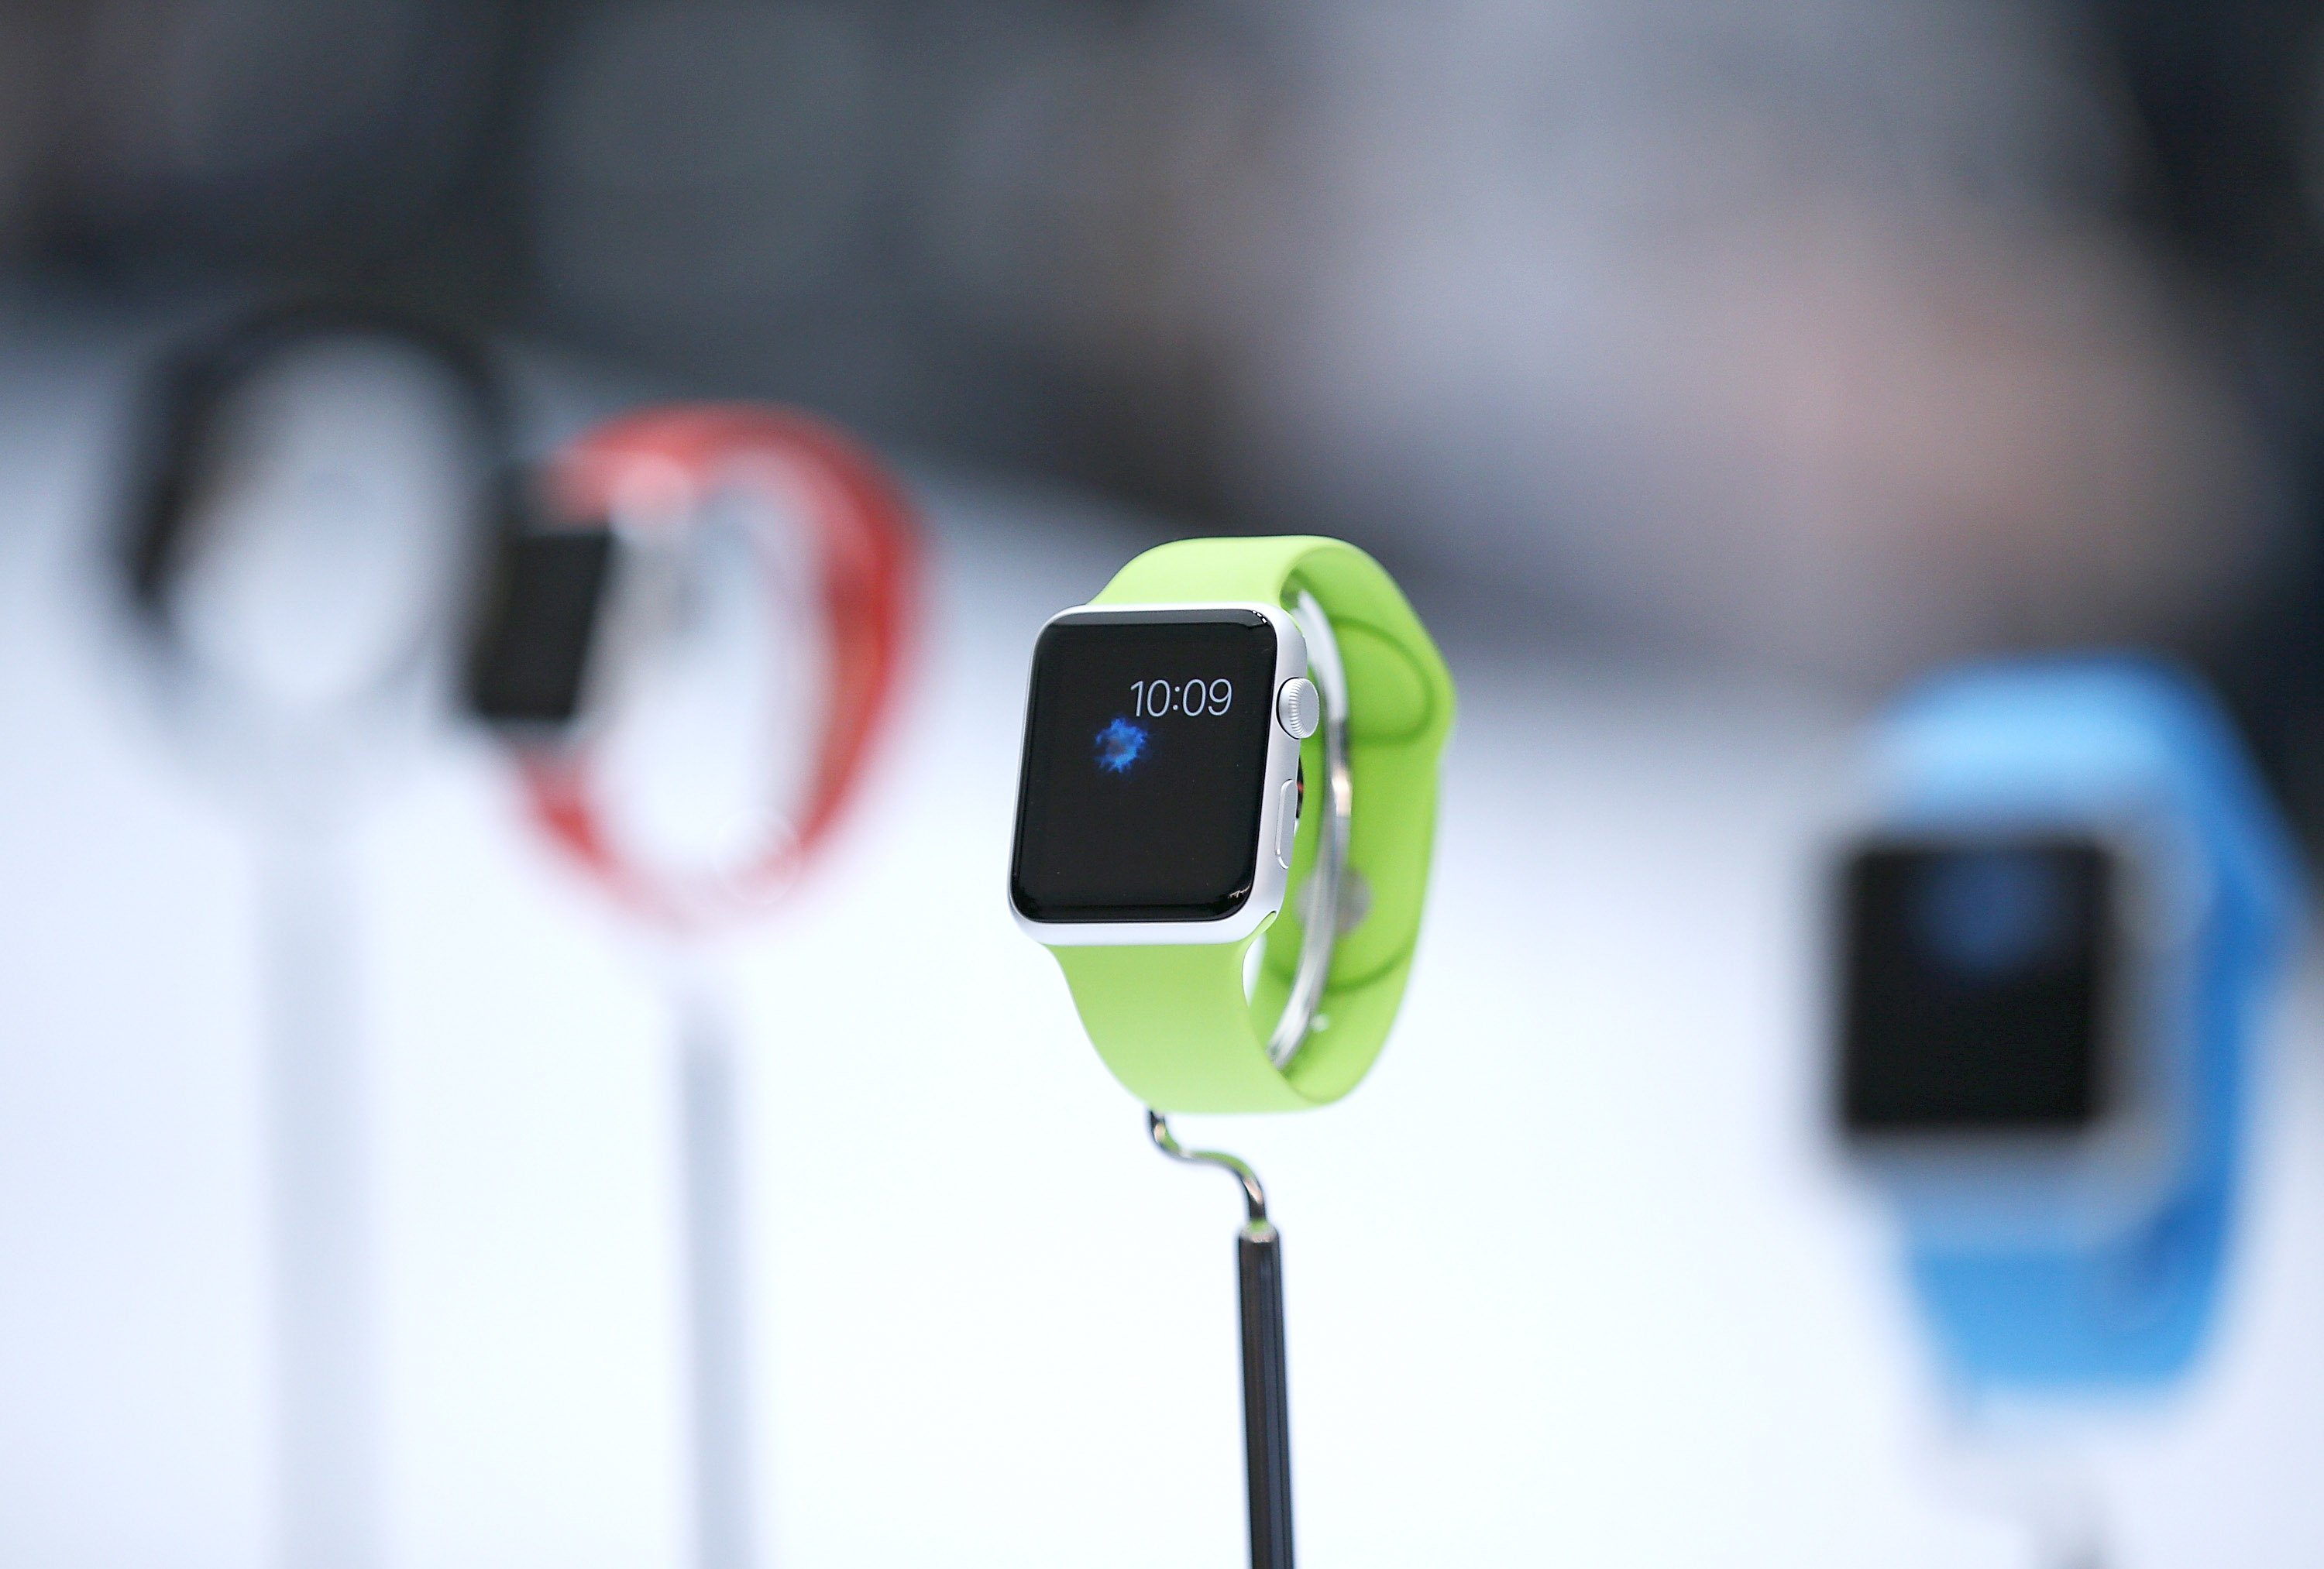 The new Apple Watch is displayed during an Apple special event at the Flint Center for the Performing Arts on Sept. 9, 2014 in Cupertino, Calif. (Justin Sullivan—Getty Images)